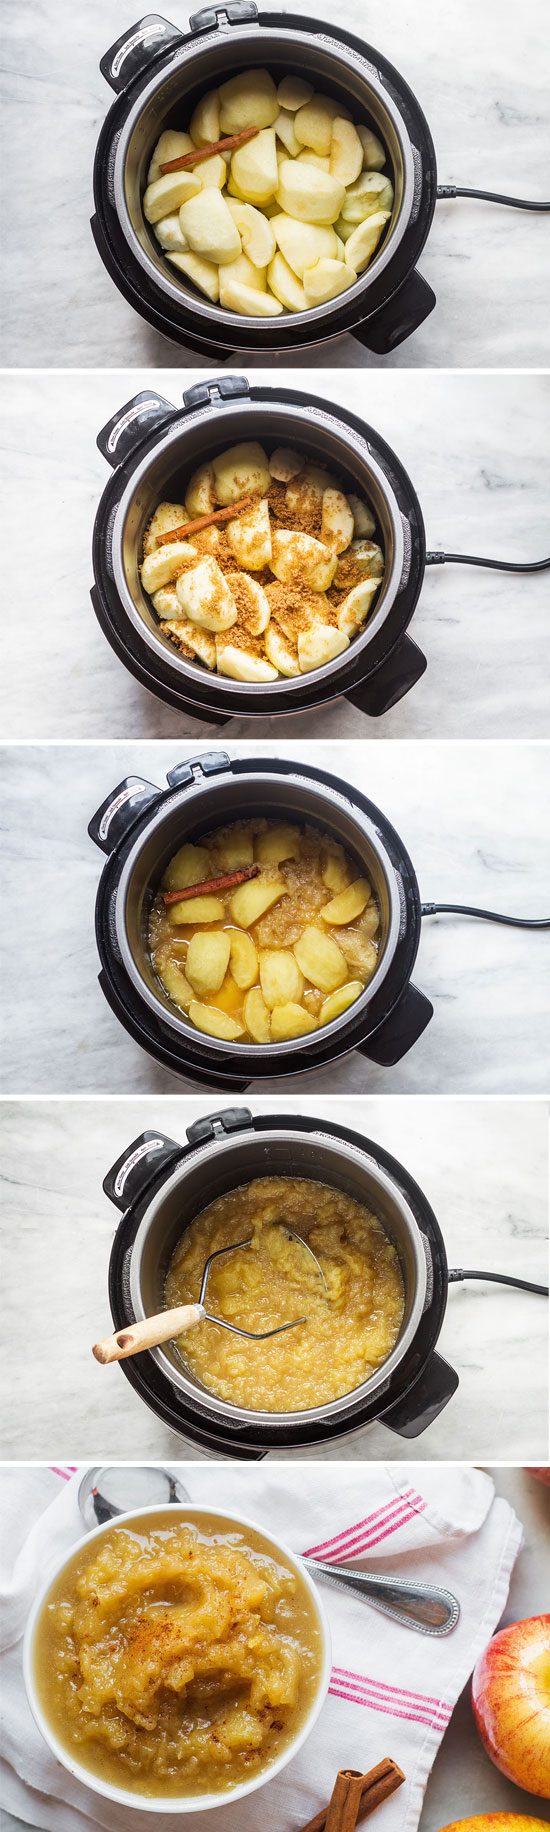 Instant Pot Applesauce — If you love homemade applesauce, you’ve got to try this method. Absolutely delicious and comes out perfect every time!